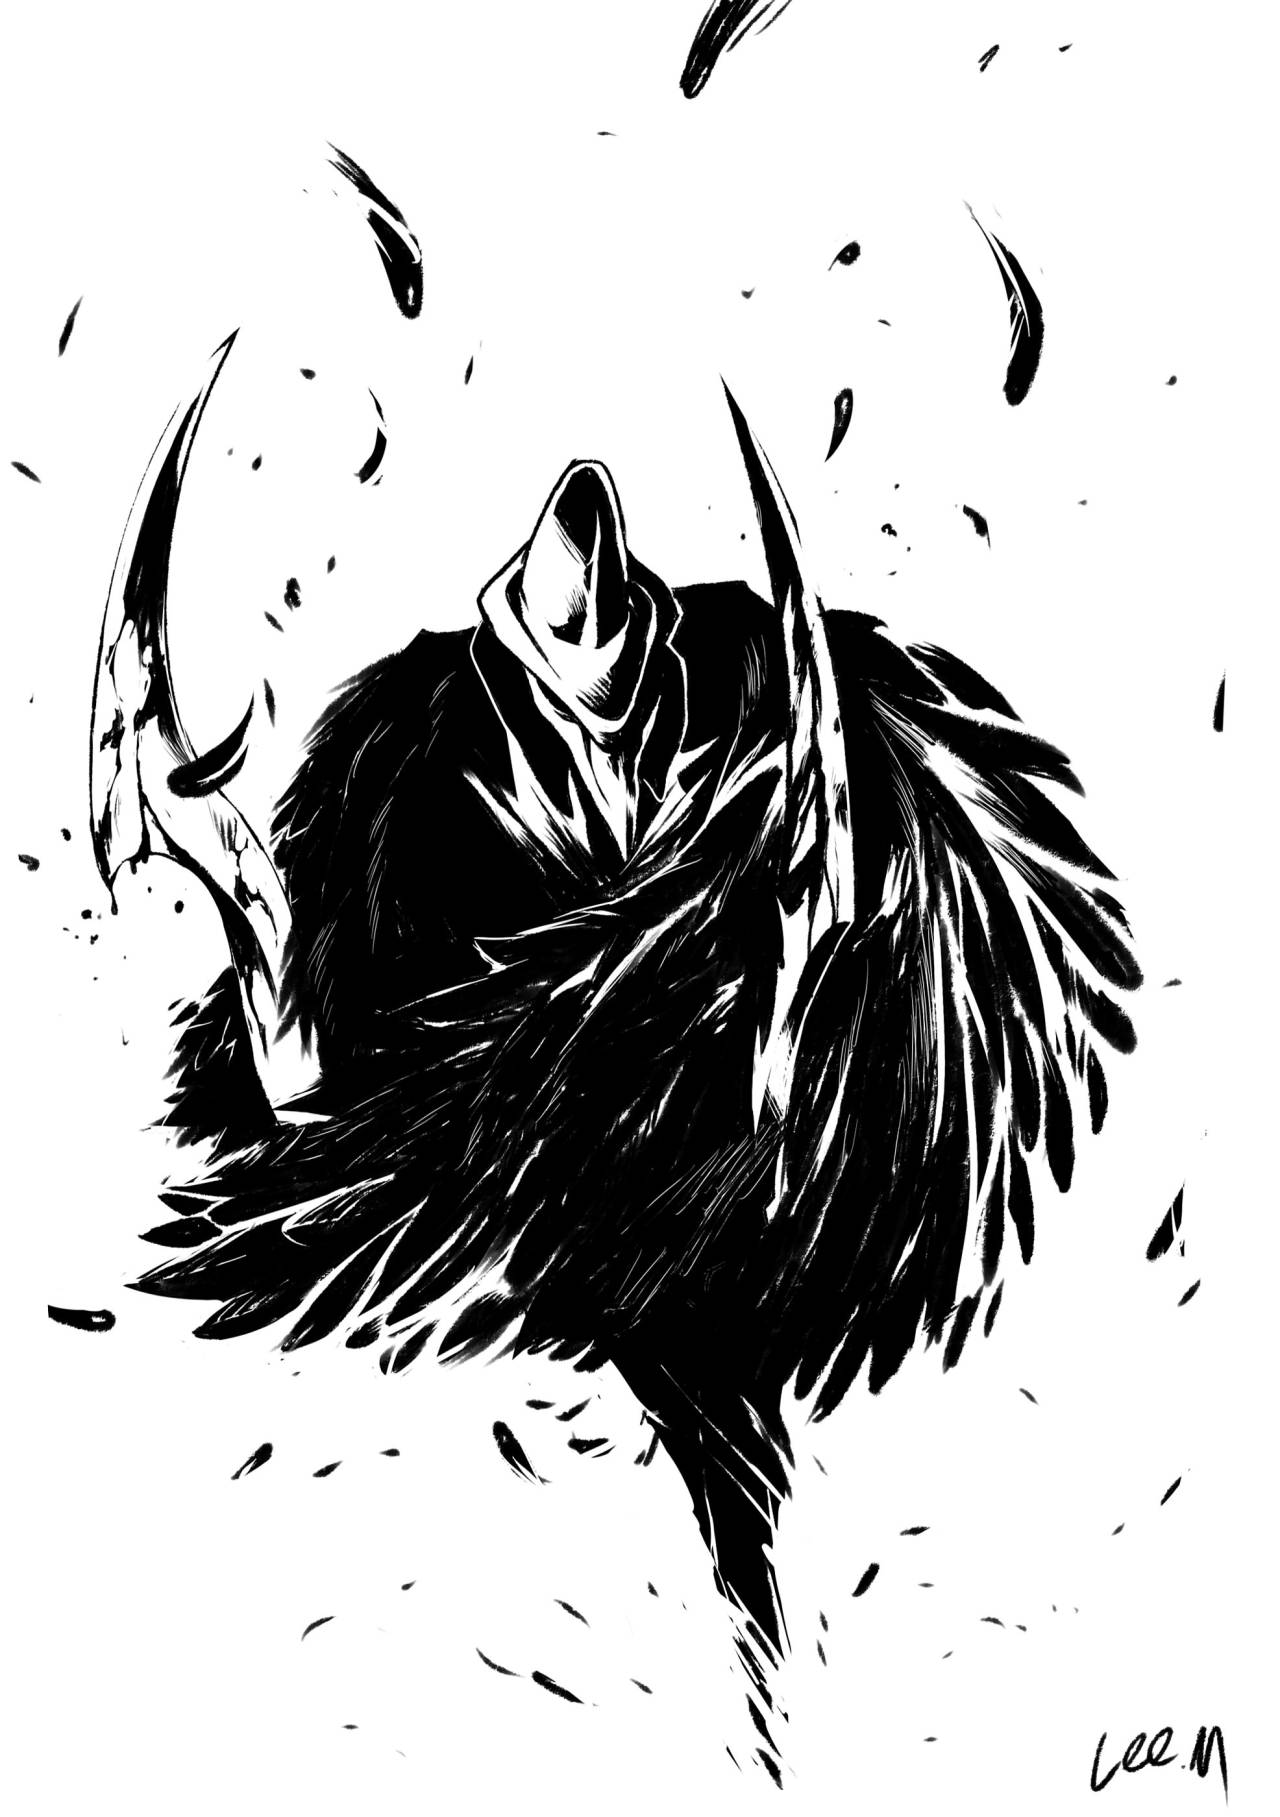 Lee Montayer's Art Tumblr? — Day 28 is Eileen the Crow from Bloodborne!